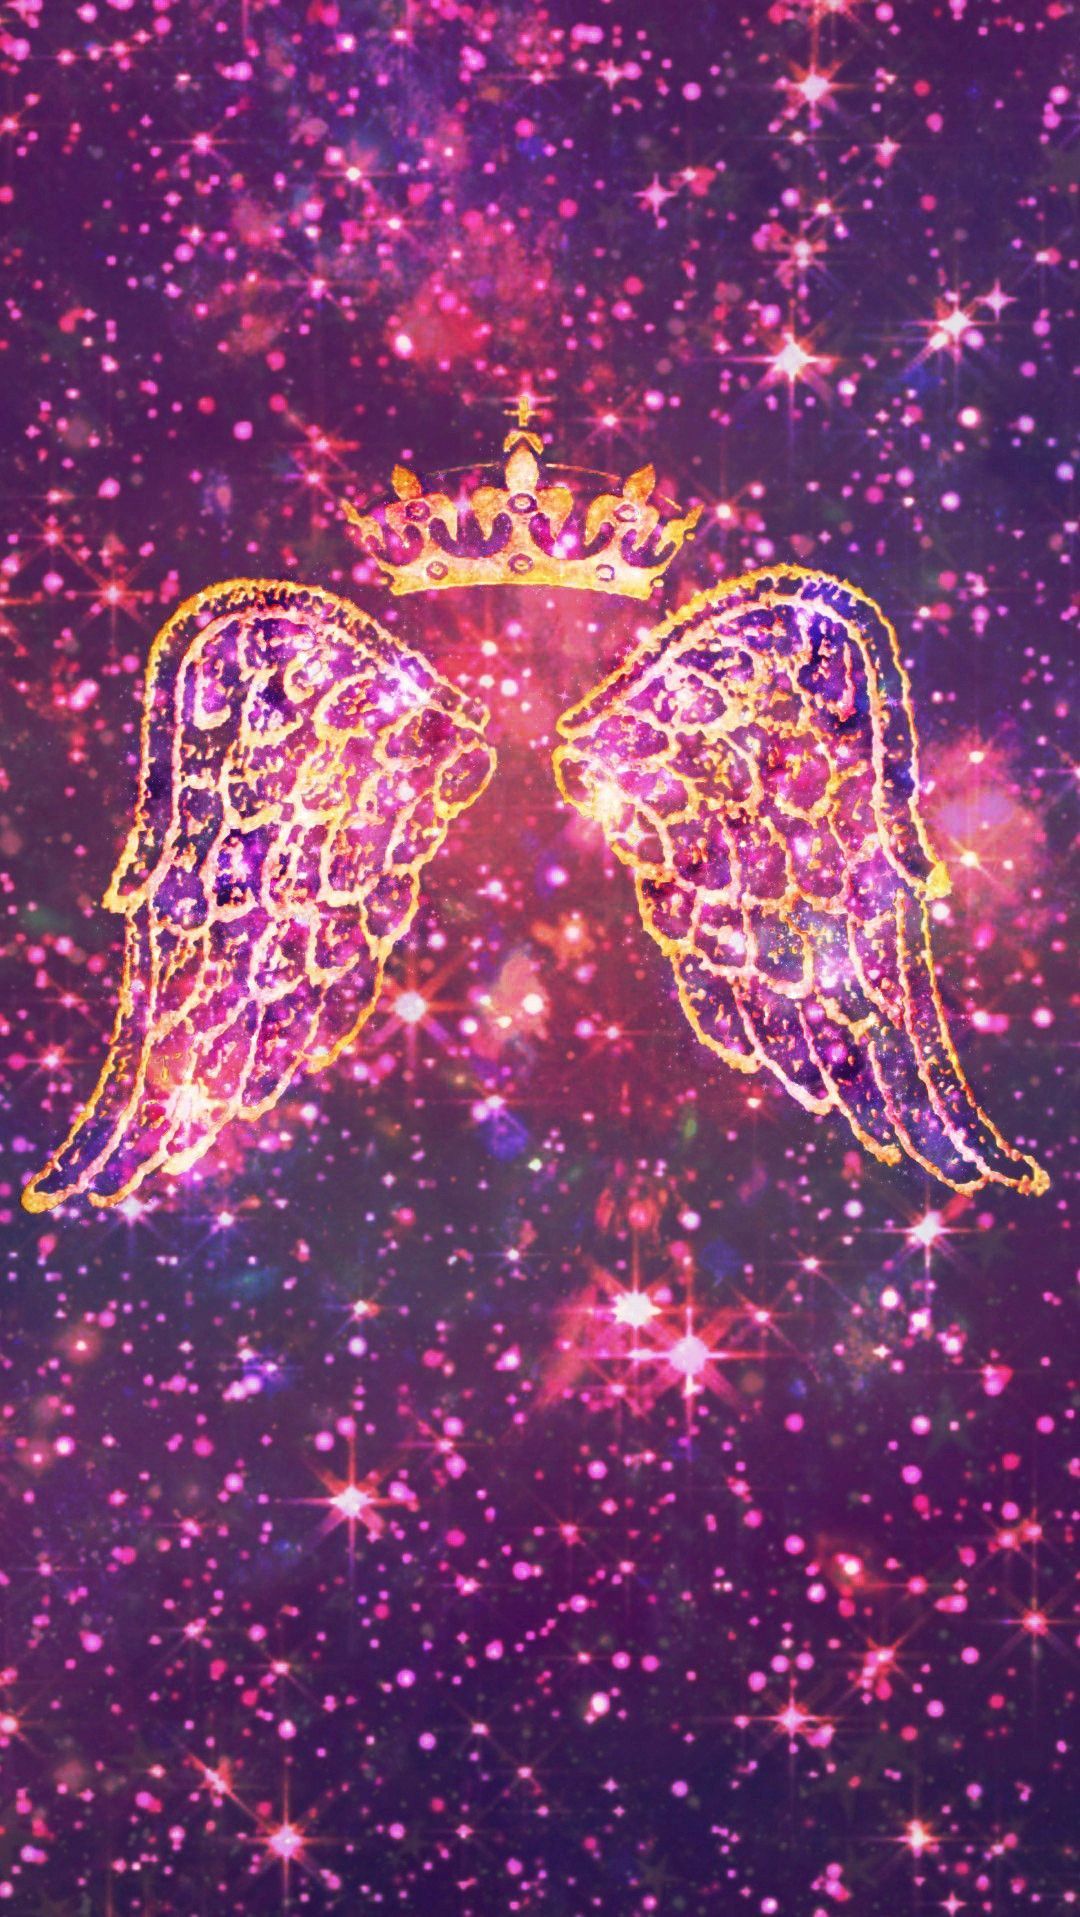 Angel Queen Galaxy, made by me #purple #sparkly #wallpaper #background #sparkles #angel #wings #crown. Queen wallpaper crown, Queens wallpaper, Wings wallpaper